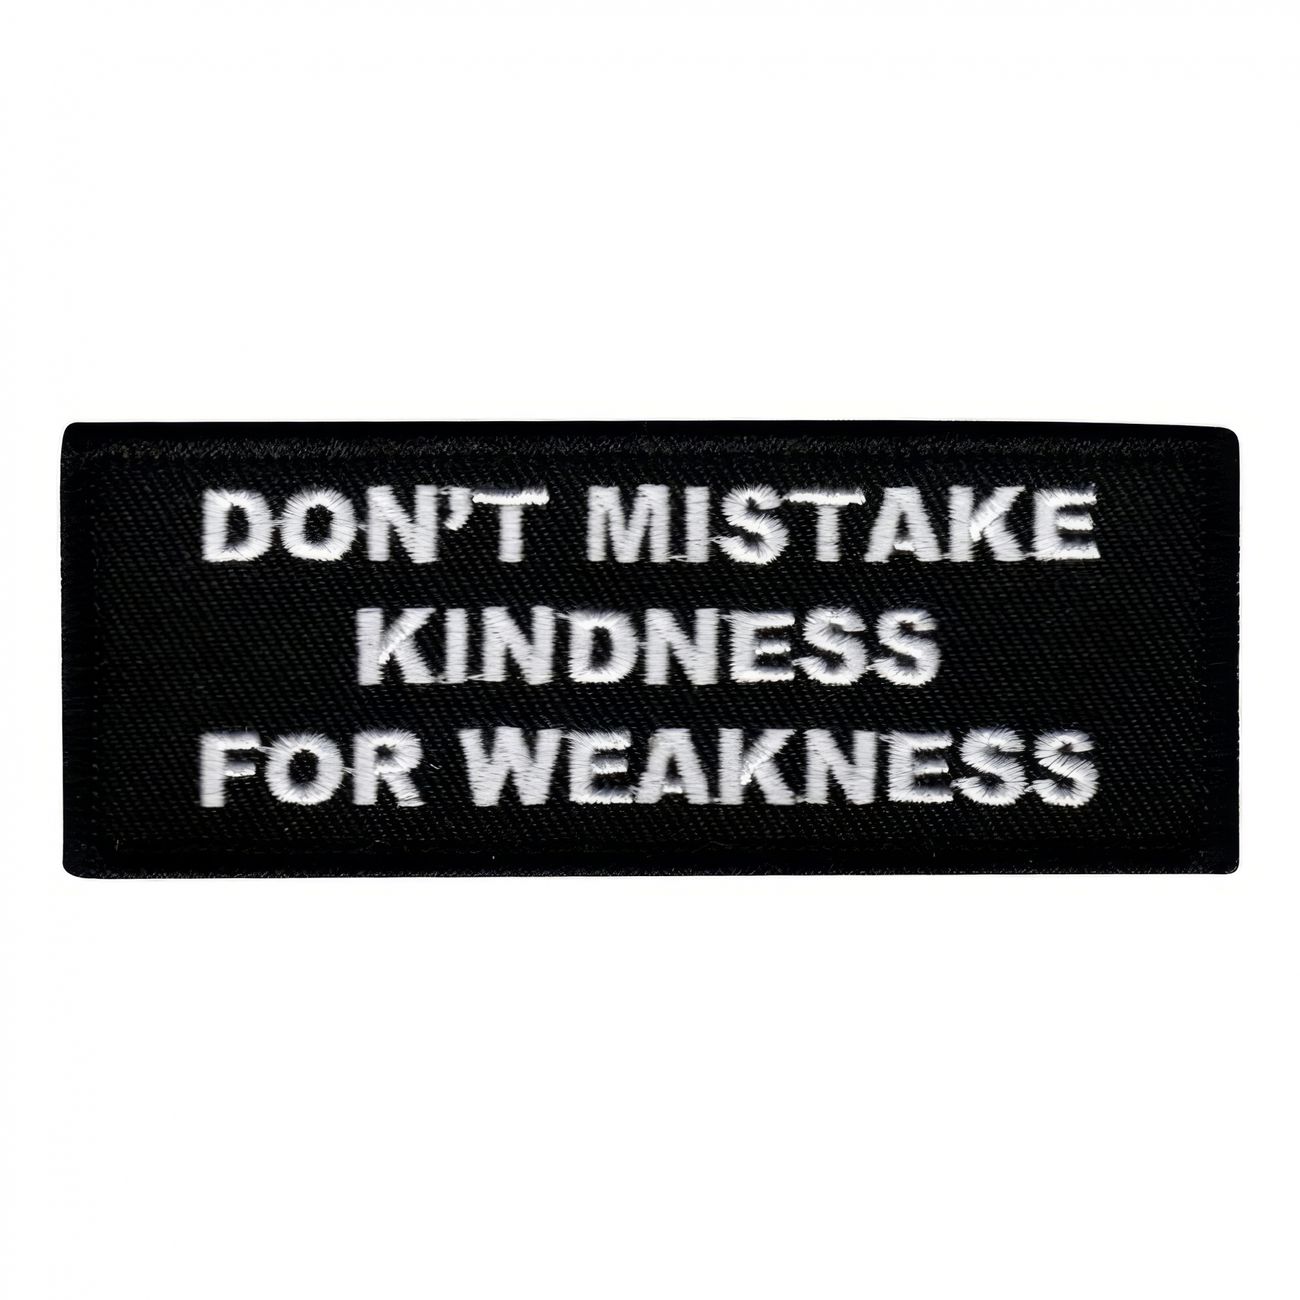 tygmarke-dont-mistake-kindness-for-weakness-s-94610-1